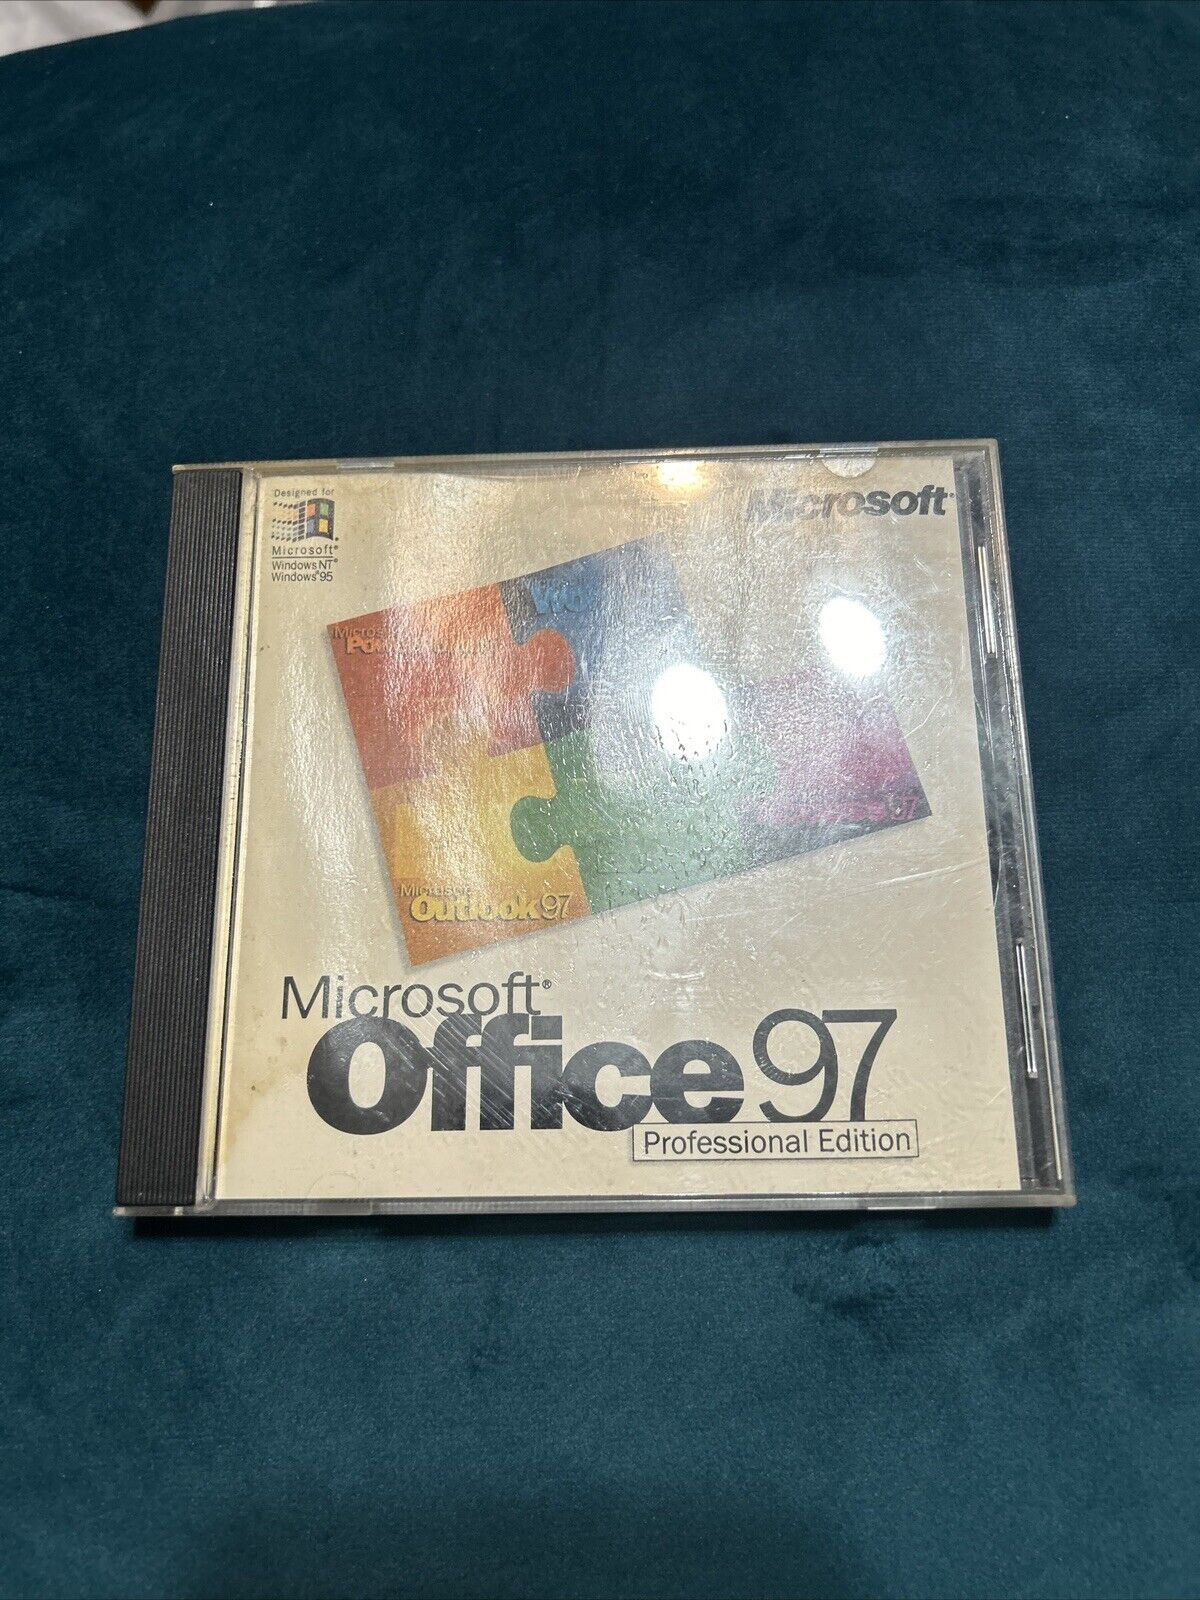 Microsoft Office 97 Professional Edition - Complete In Case With Product Key VG